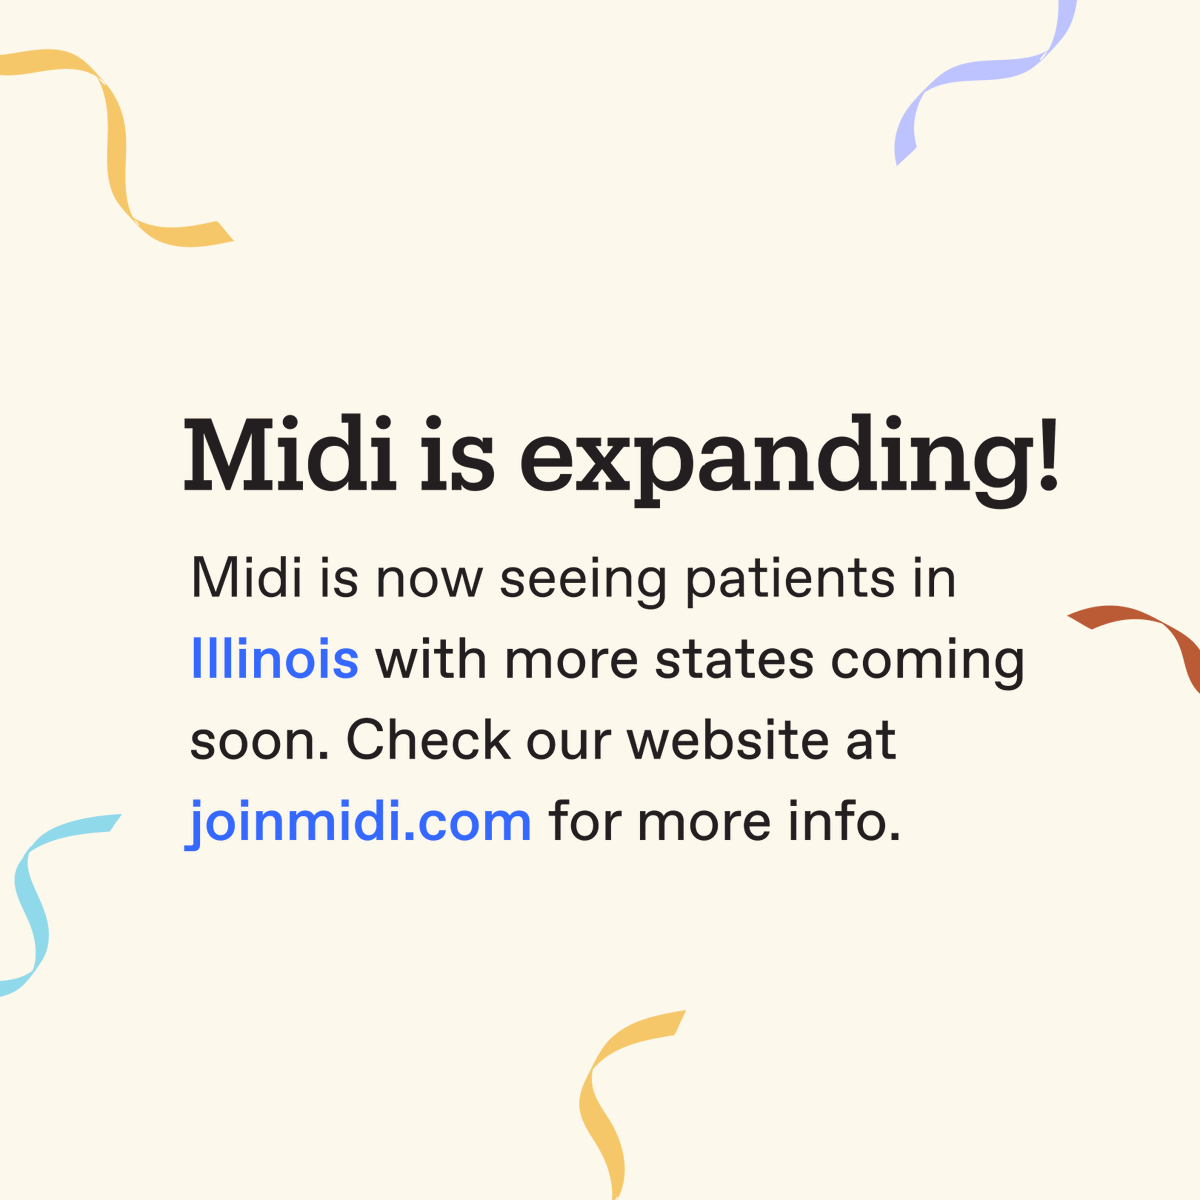 We’ve got some exciting news. 📣 After lots of hard work (nailing insurance, credentialing clinicians, and more), we’re thrilled to announce that we can now serve patients in Illinois! 💙

#JoinMidi #MidiHealth #Illinois #womenshealthcare #menopause